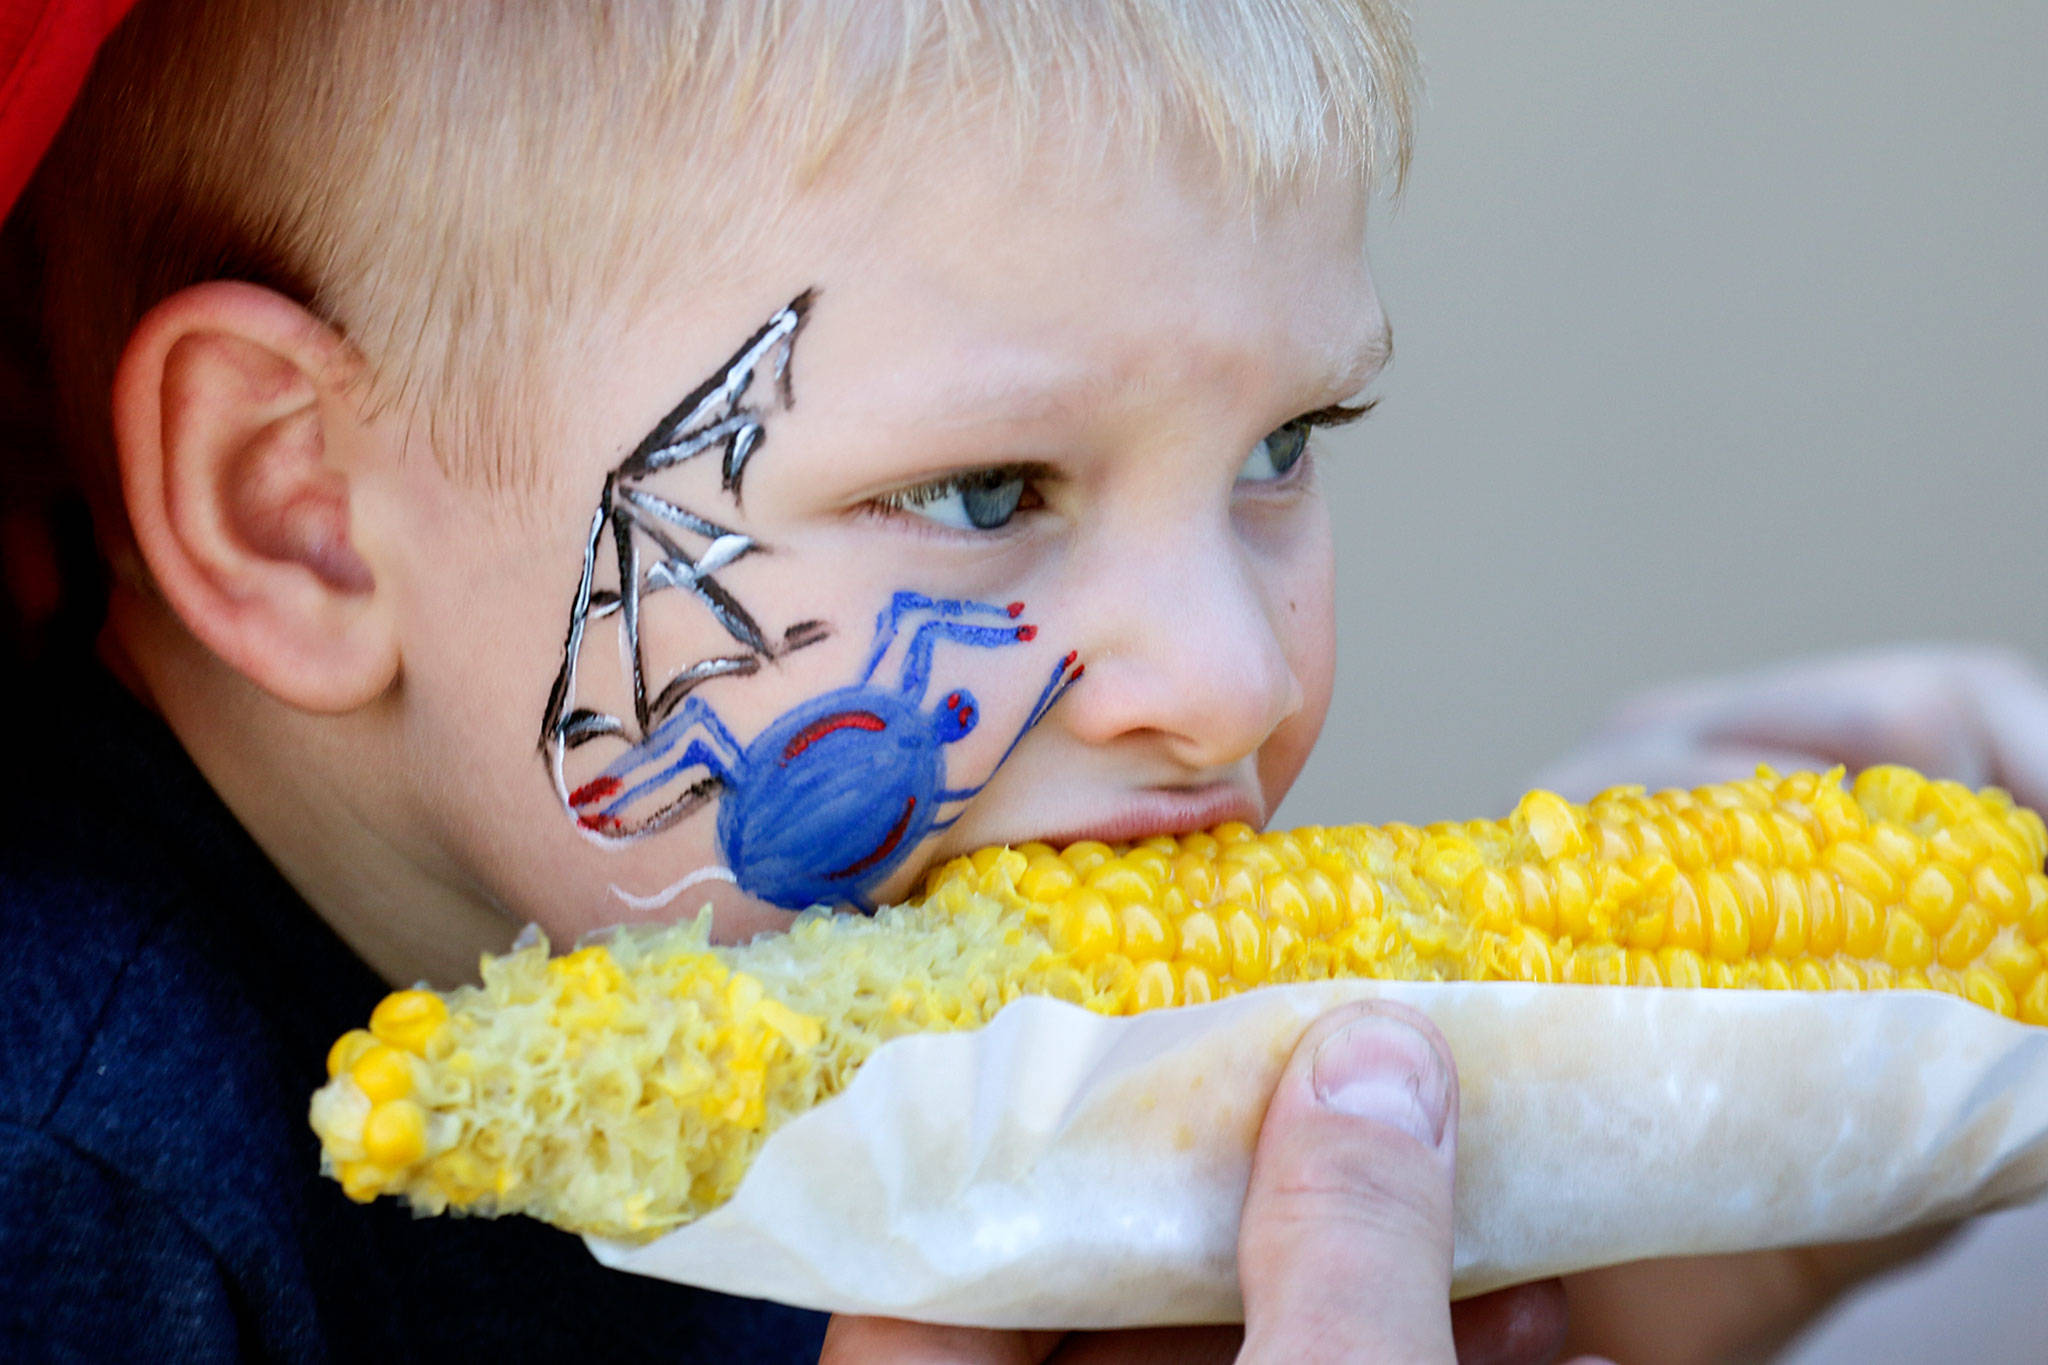 Lincoln Pillar enjoys corn on the cob on at the Evergreen State Fair in 2016. (Kevin Clark / Herald file)